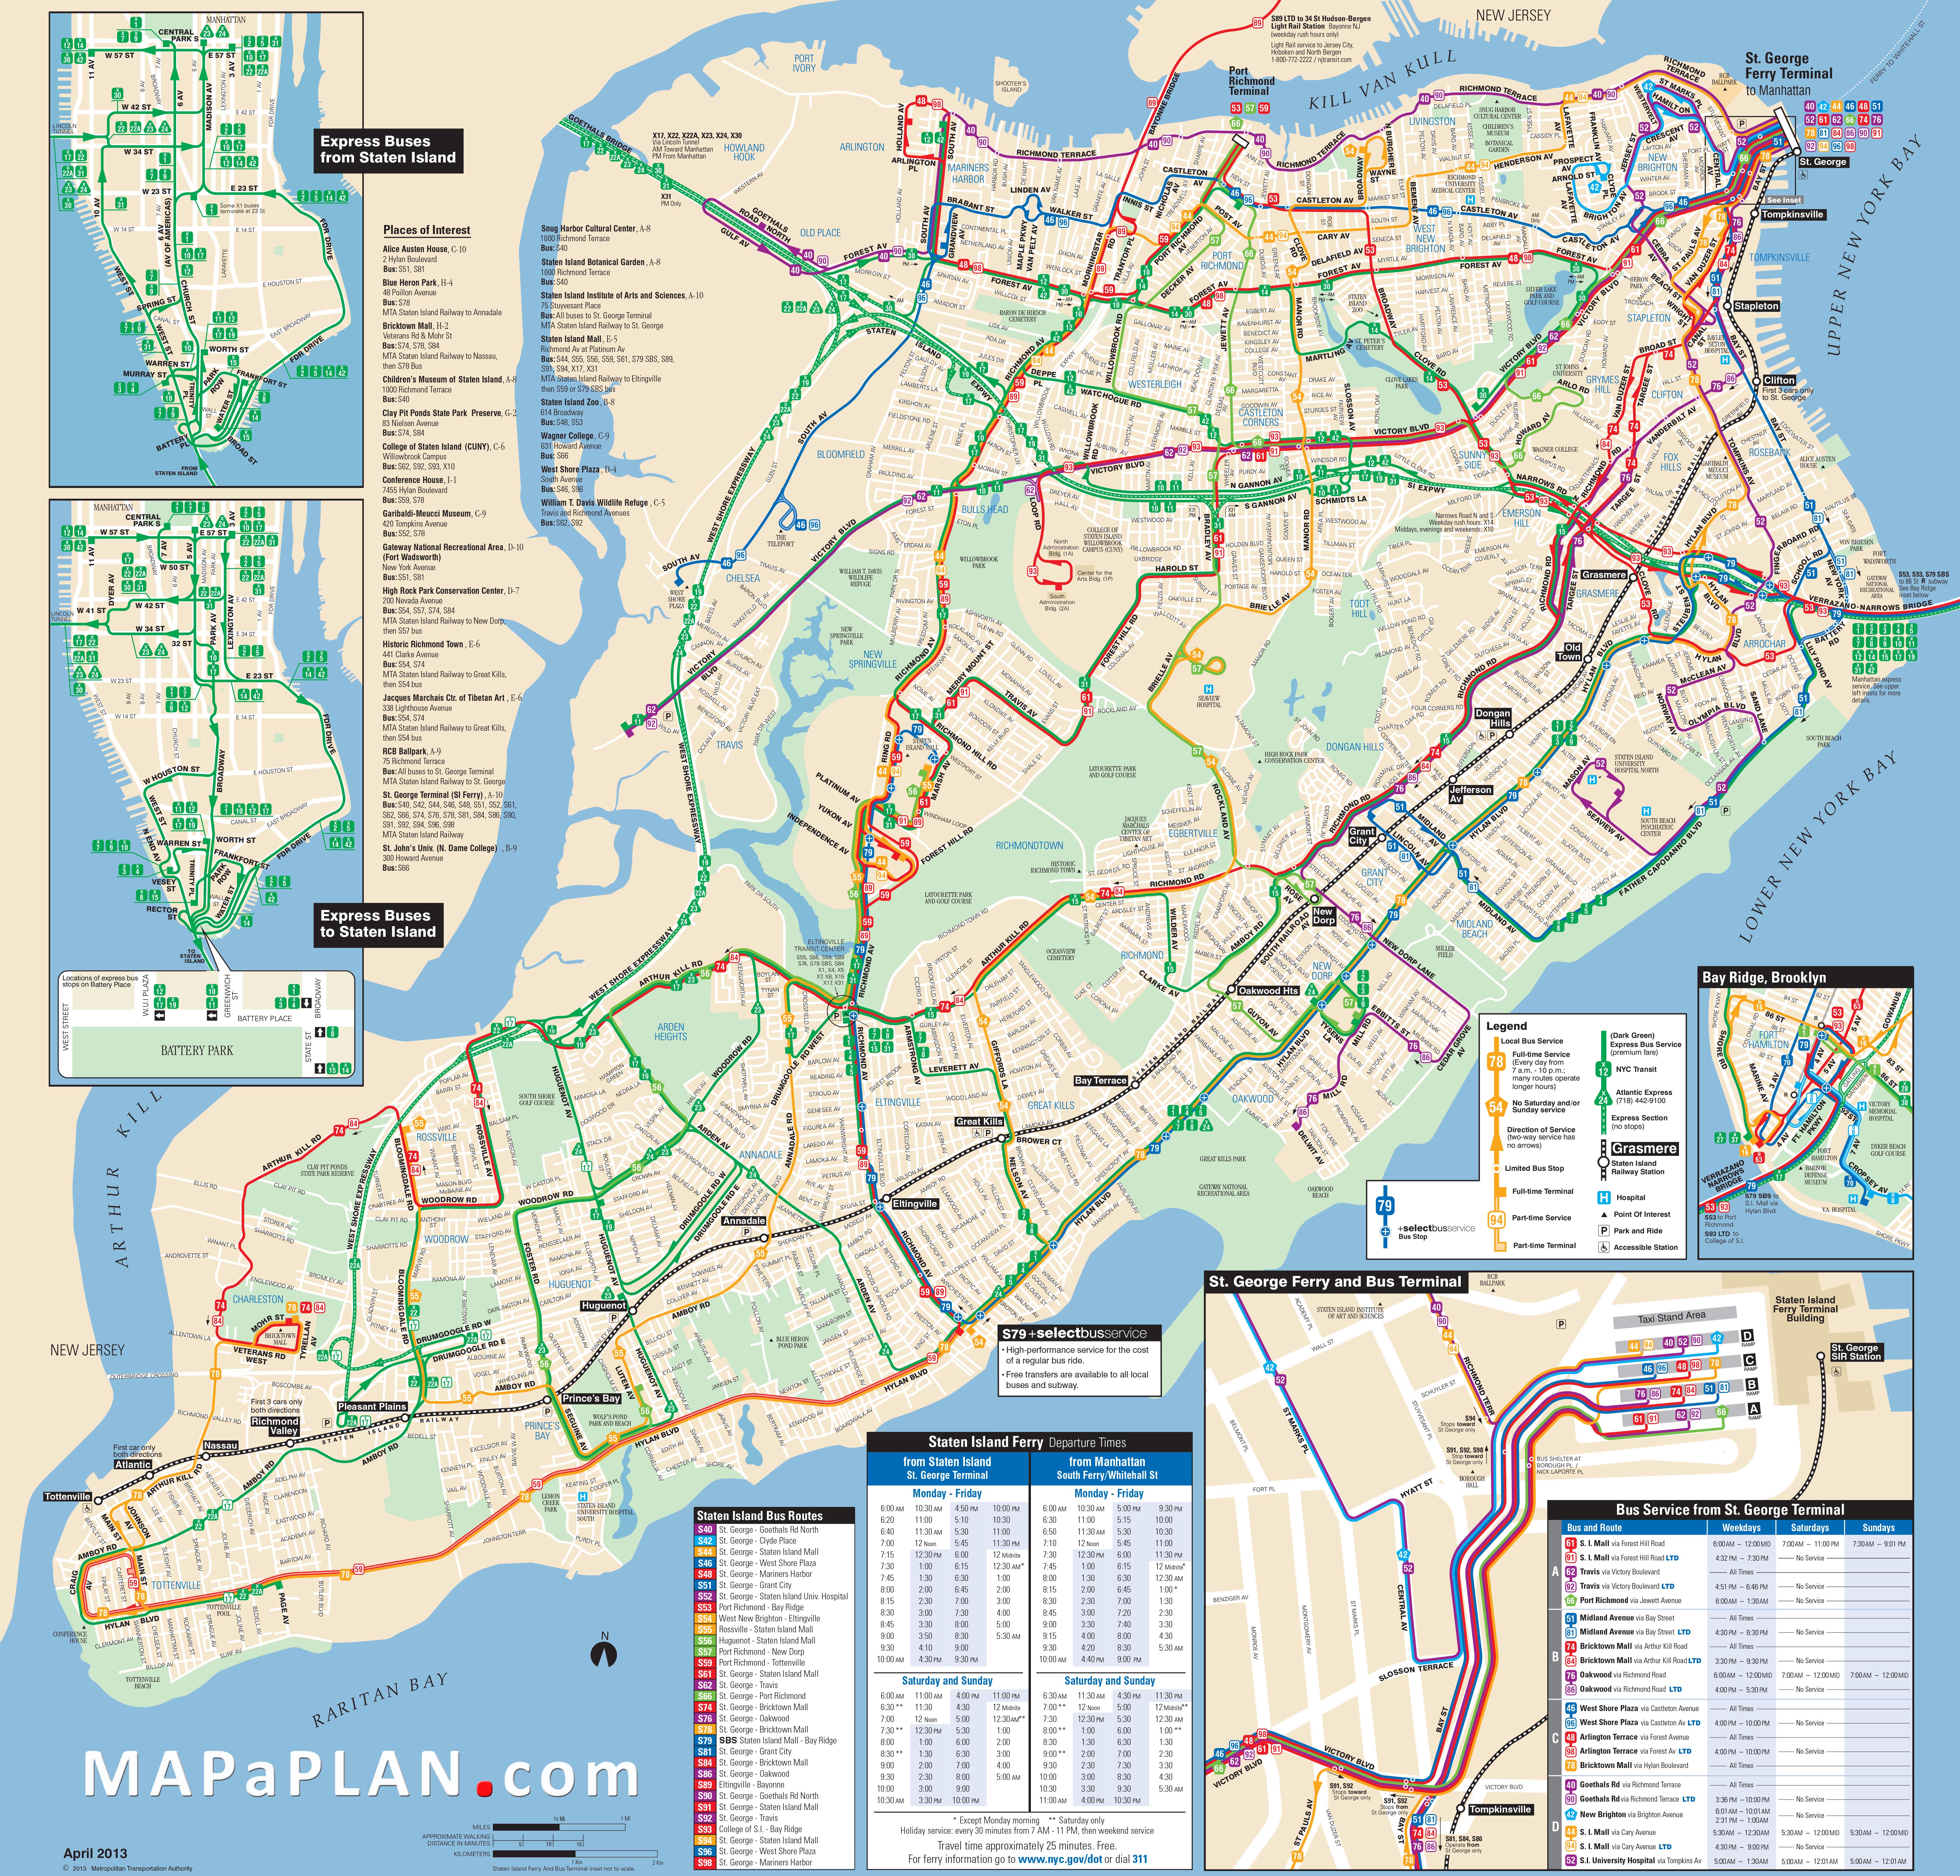 staten-island-bus-map-new-york-top-tourist-attractions-map